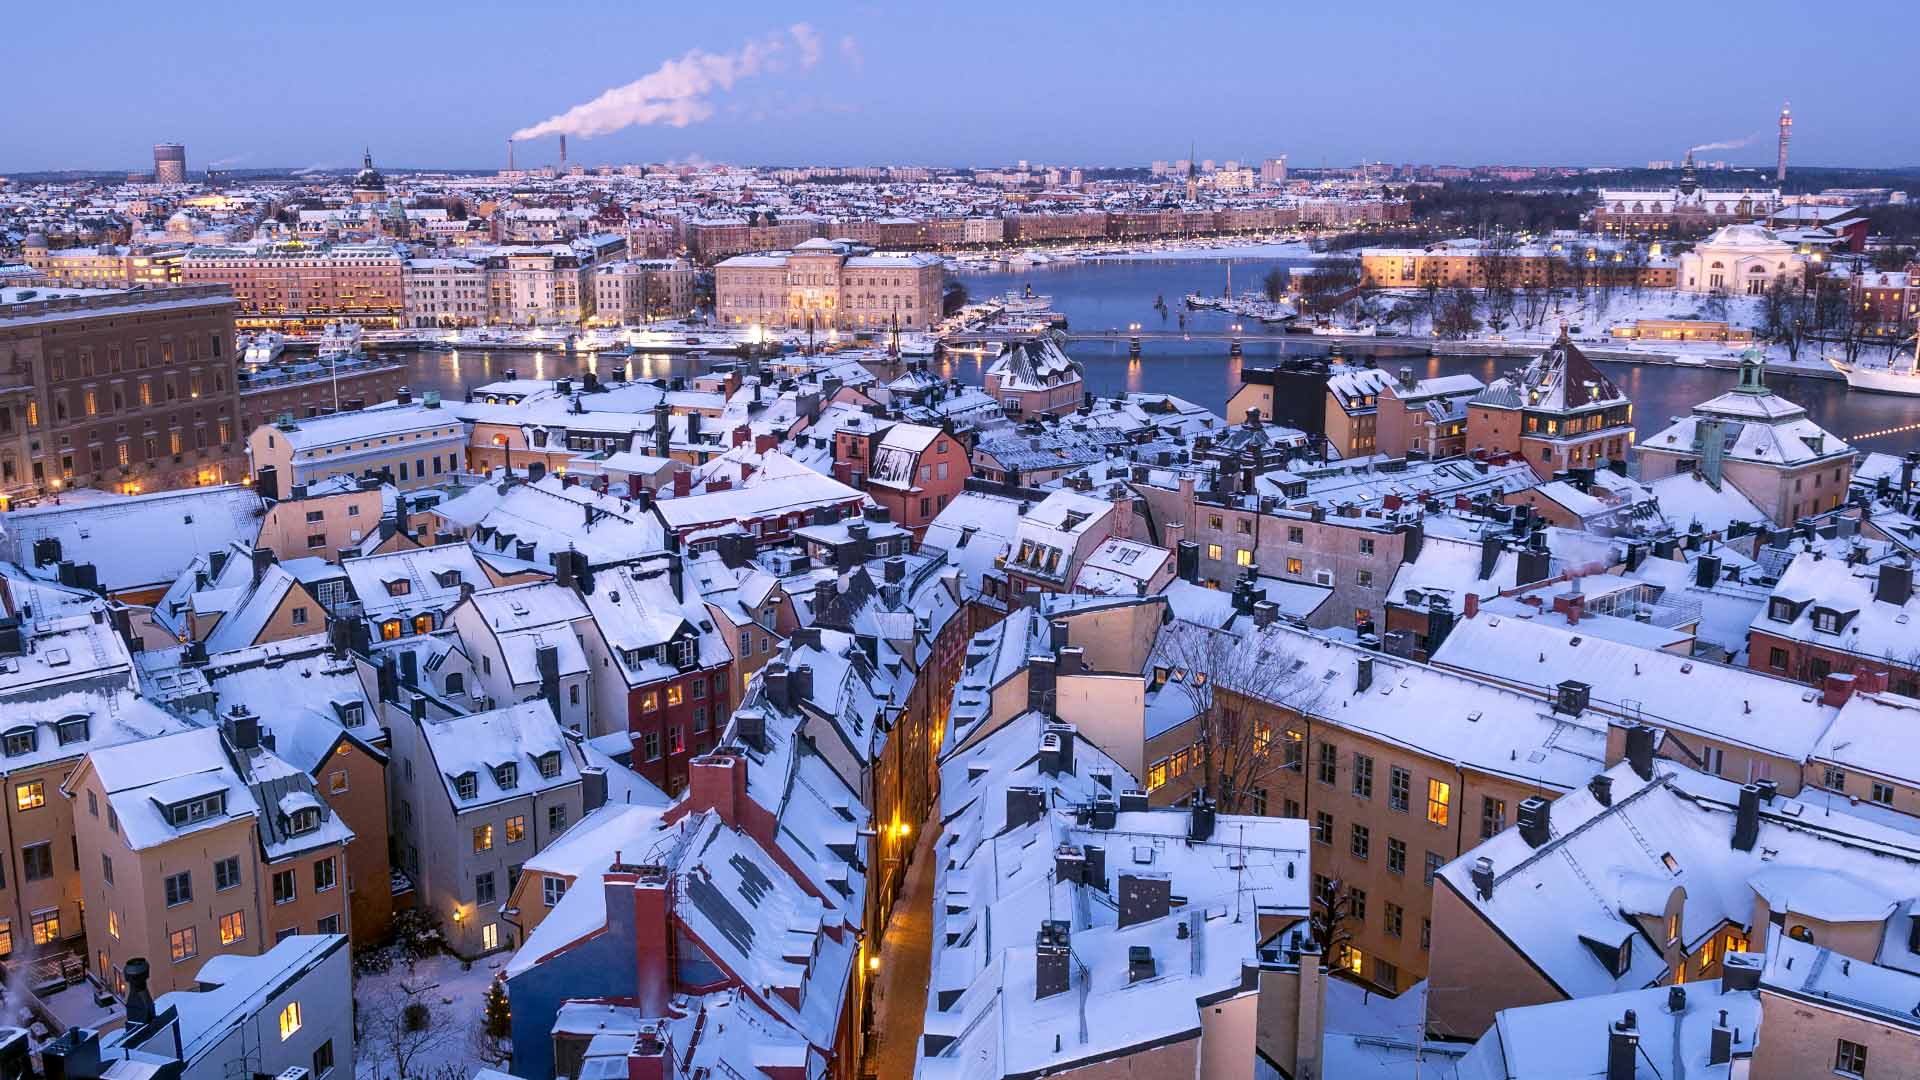 old town of Stockholm under snow